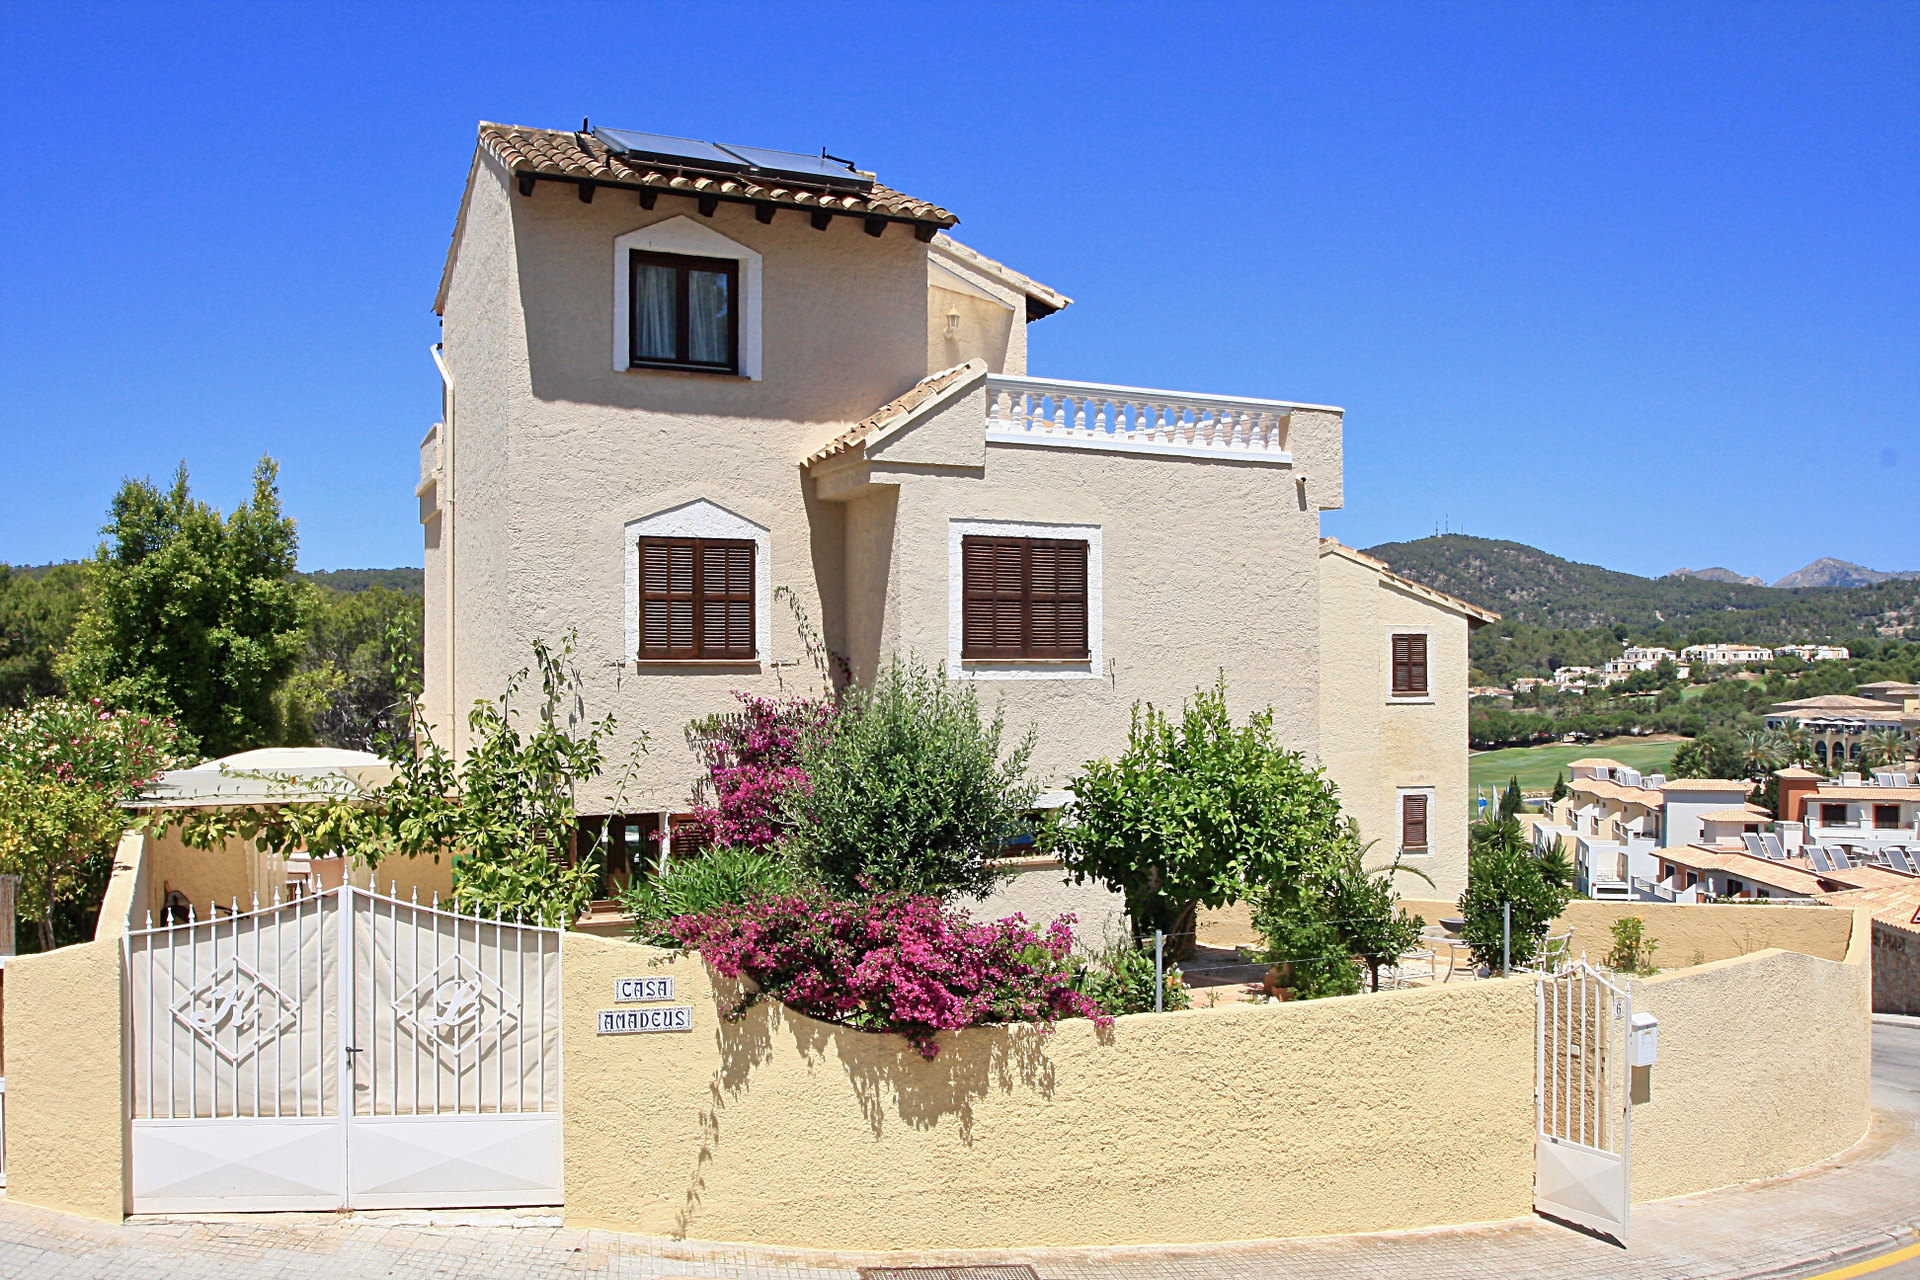 Camp de Mar: House for sale in Mediterranean complex directly on the beach of Camp de Mar